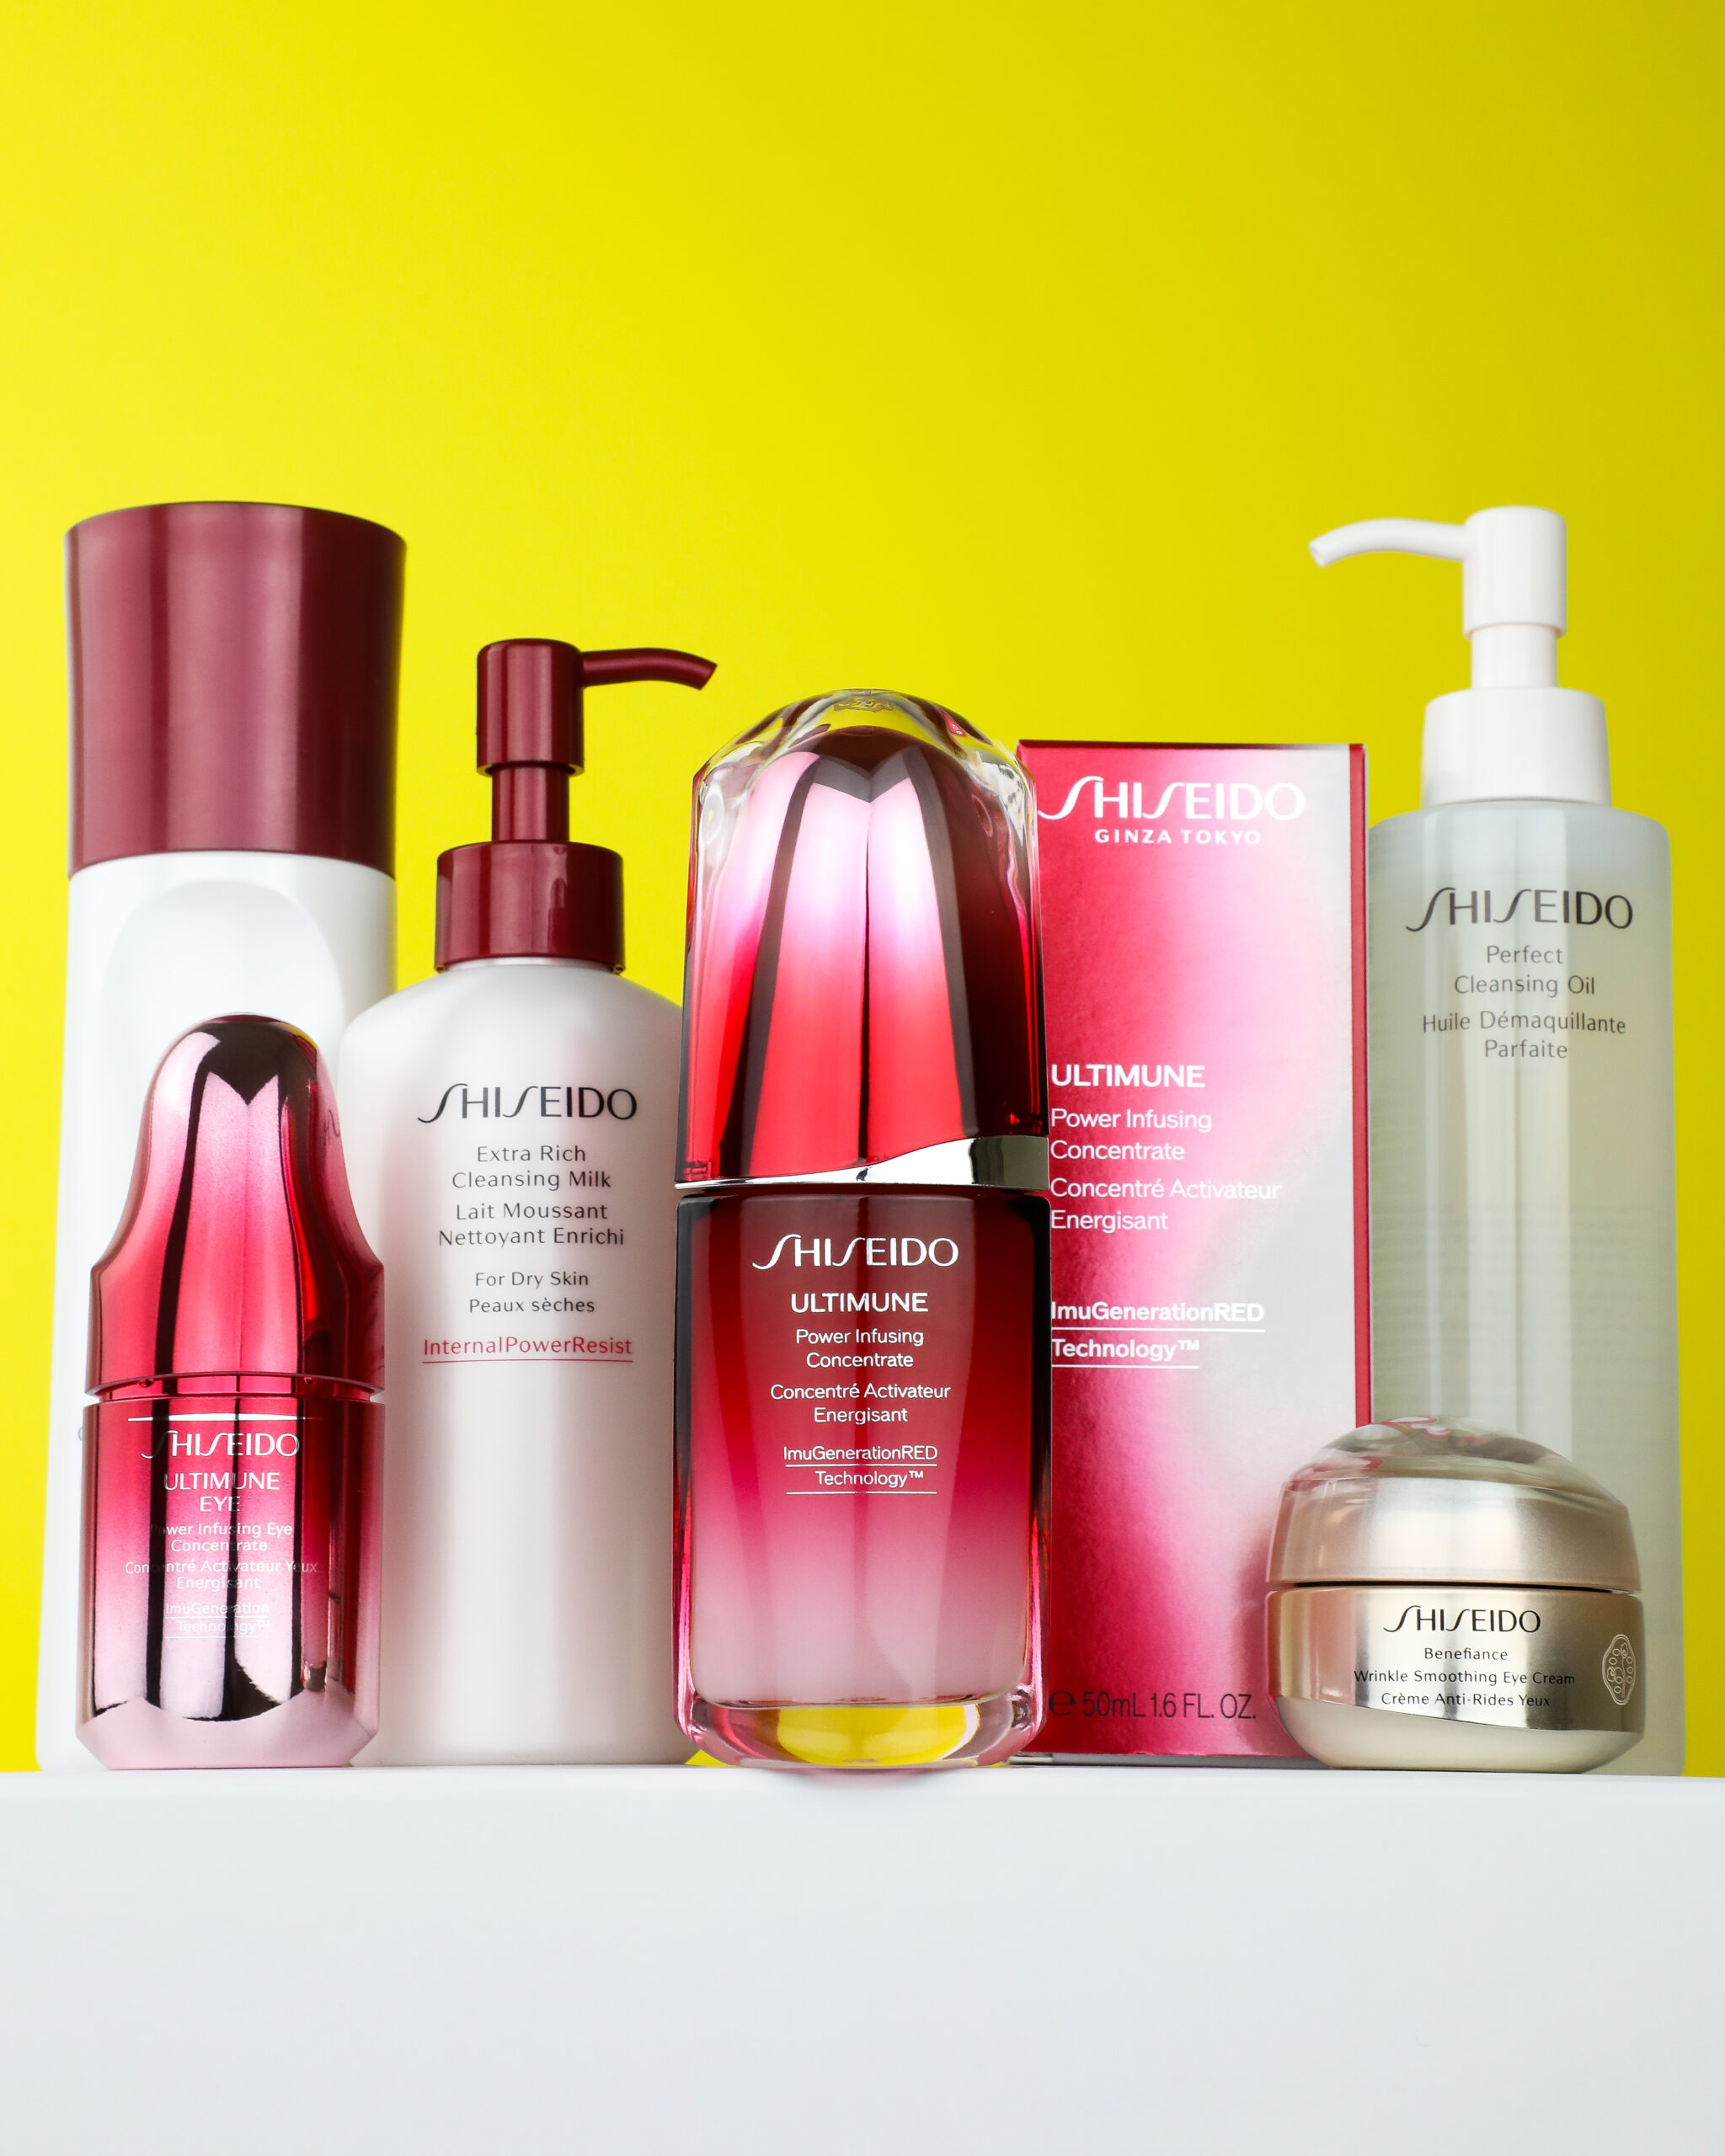 Shiseido Quick Brand Overview